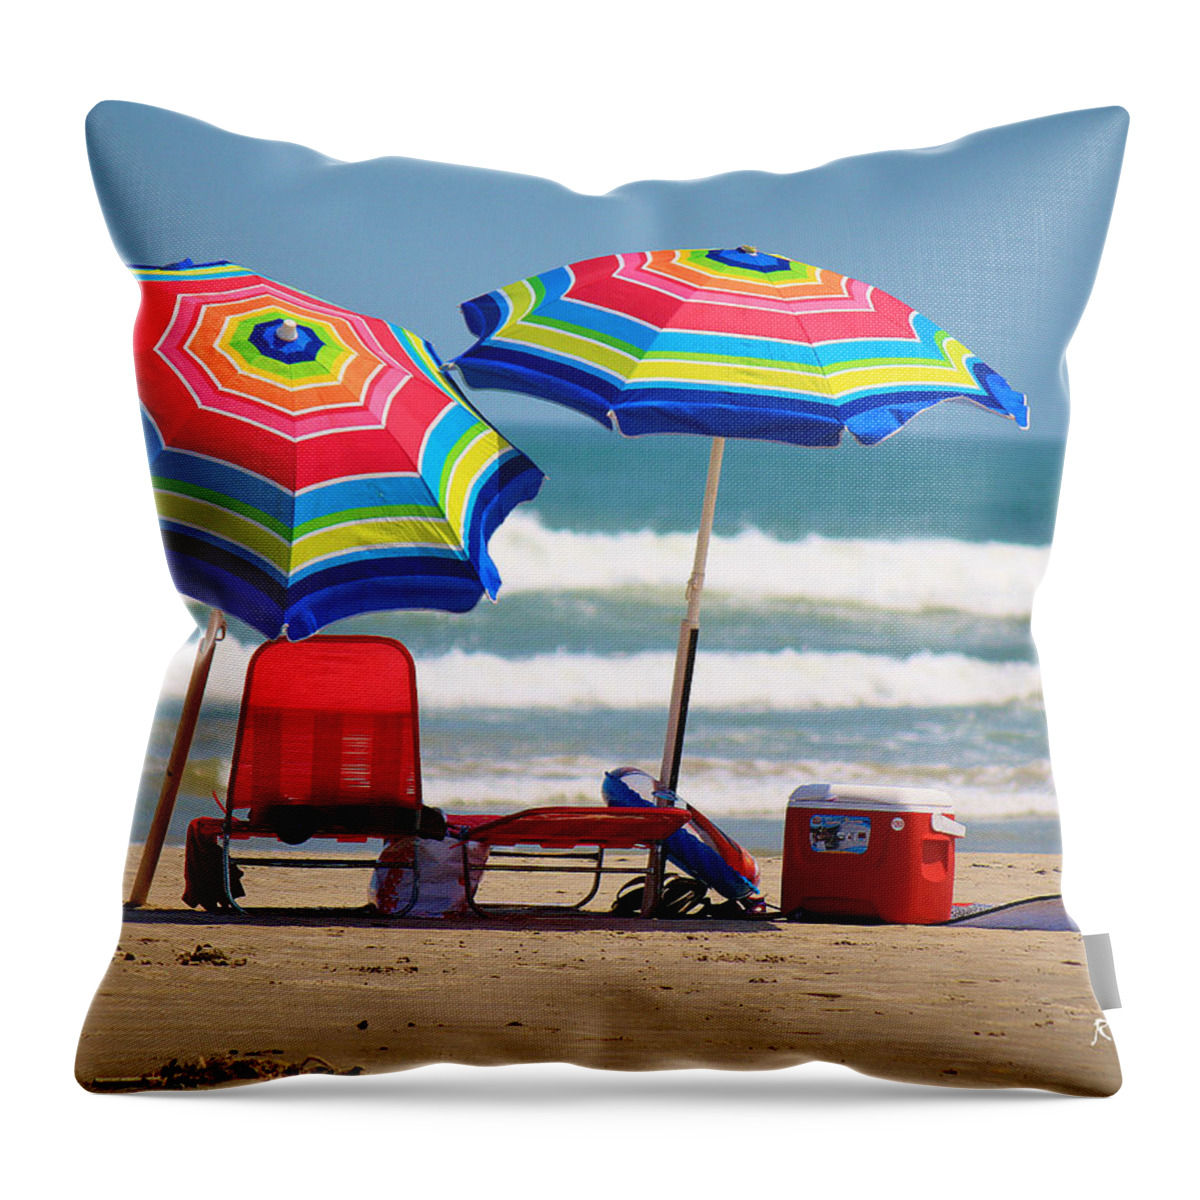 Roena King Throw Pillow featuring the photograph Two Umbrellas on the Beach in Texas by Roena King